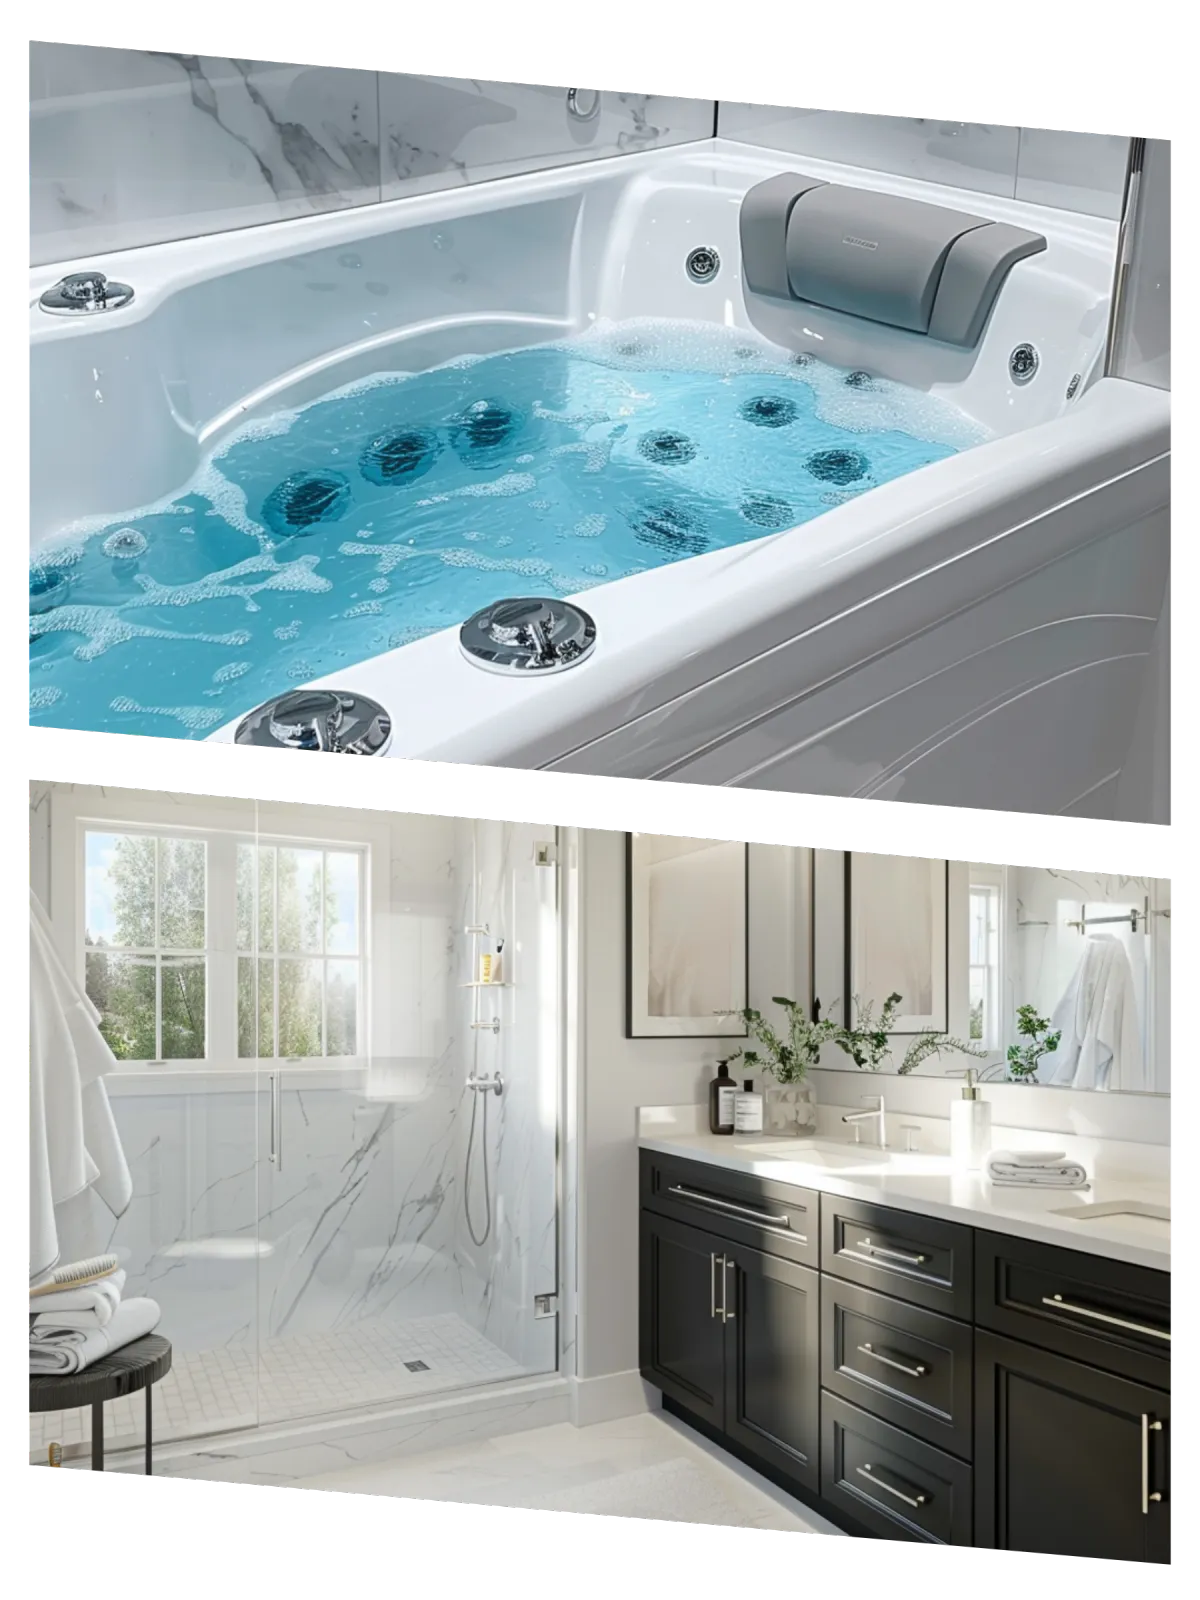 MVP Provides Beautiful, Safe, & Affordable Walk-In Tubs & Showers for All